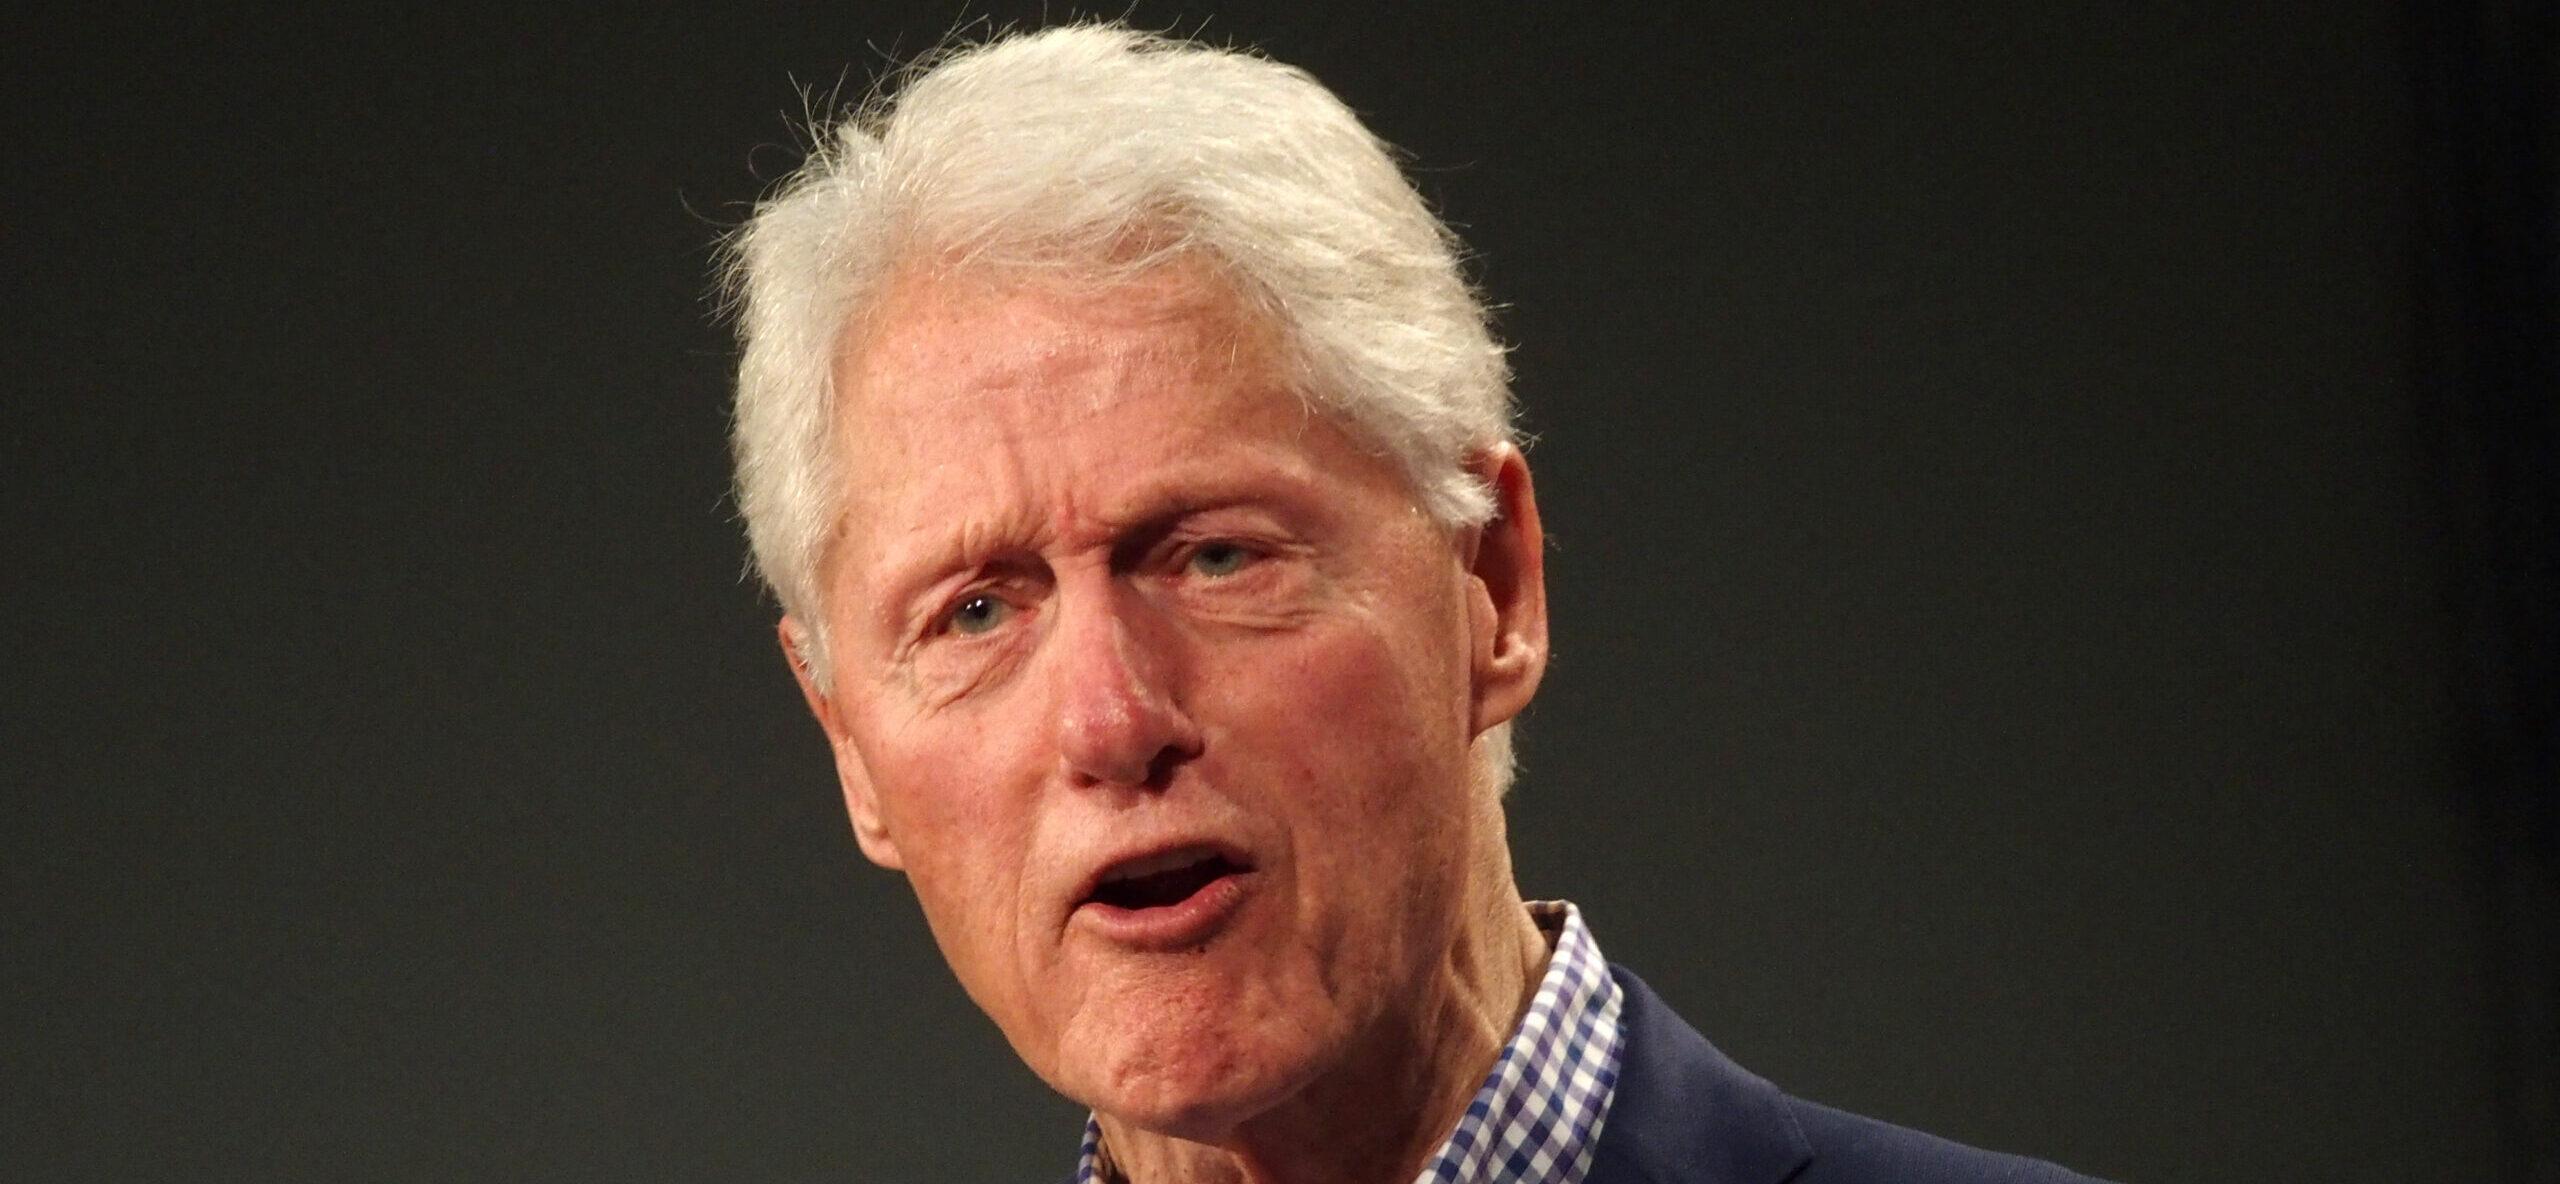 Bill Clinton’s Security Accused Of Tipping Off Raid In Epstein Docs